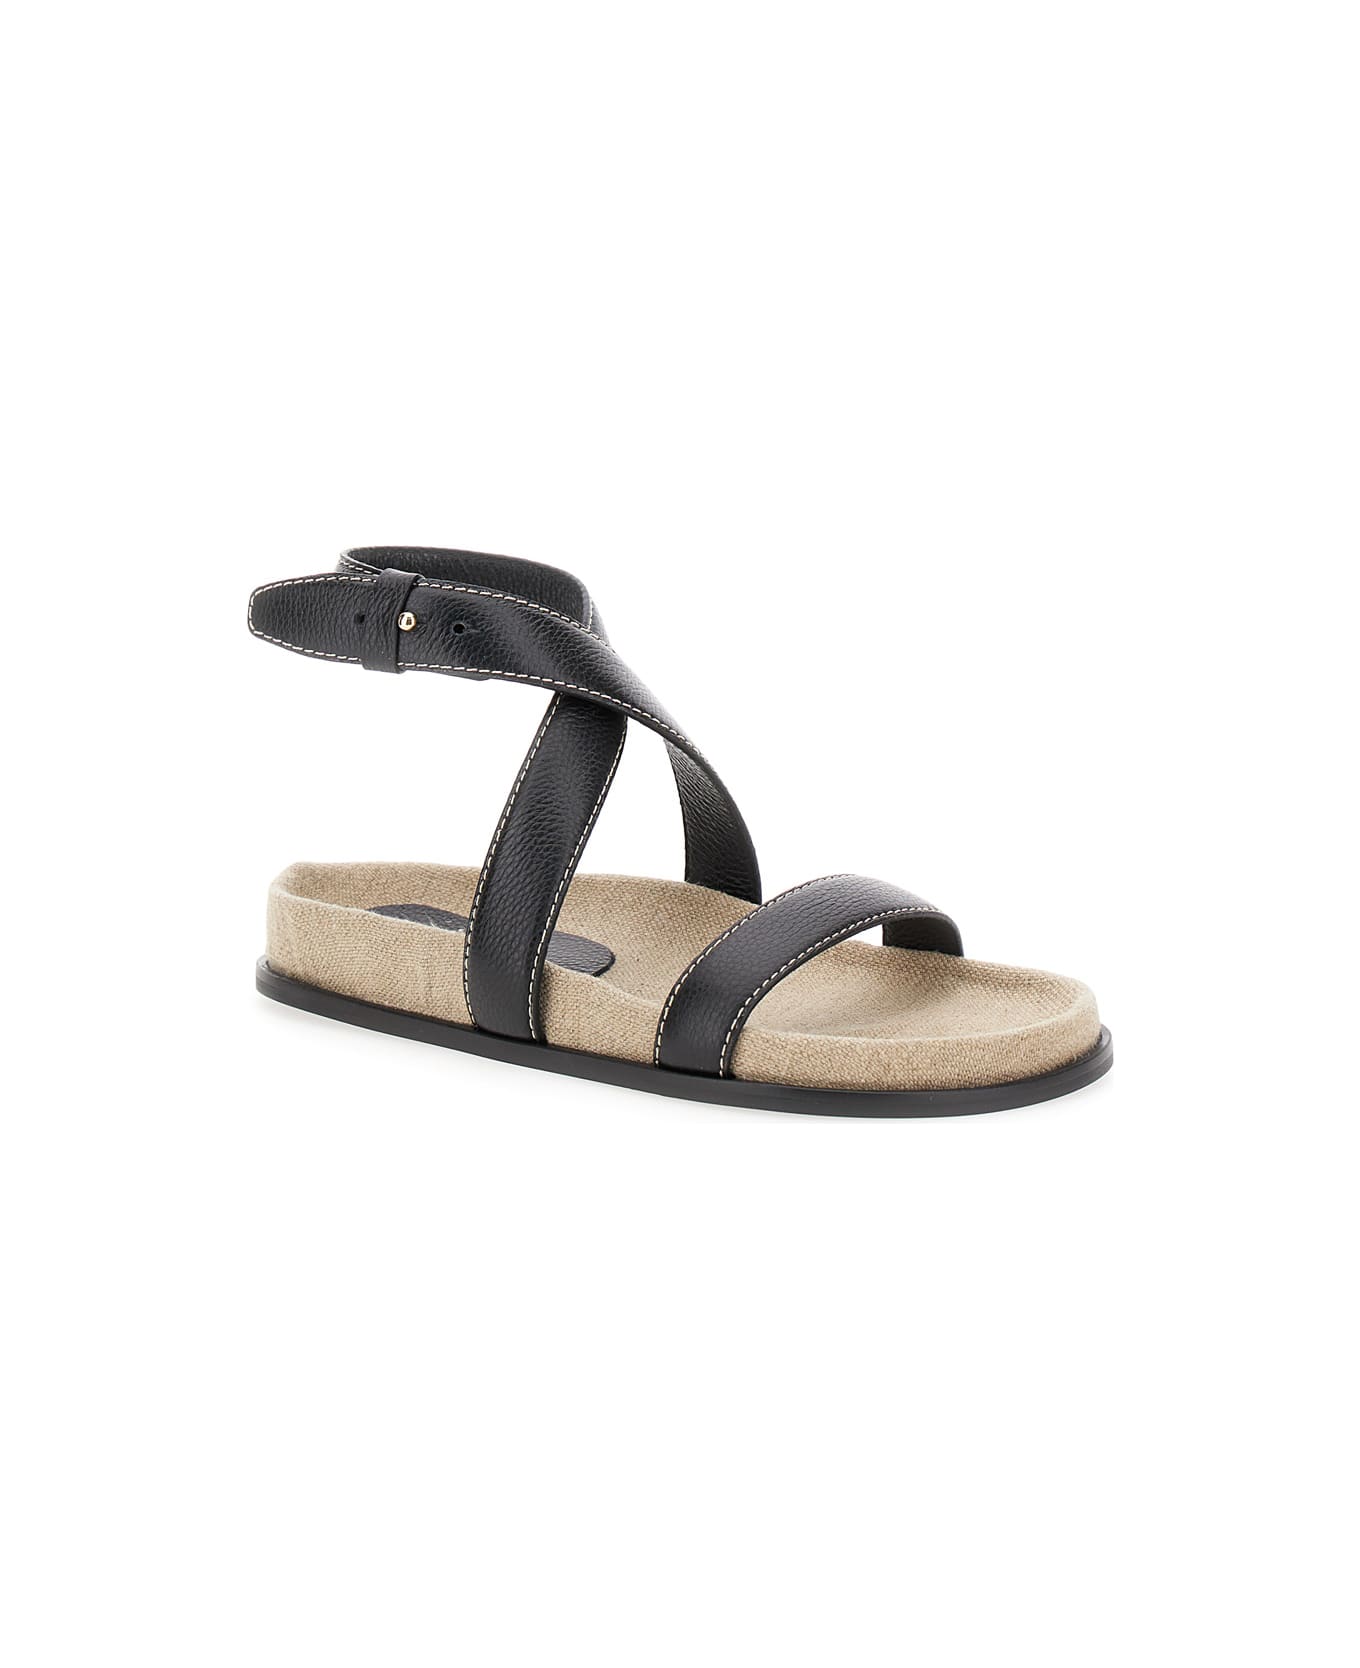 Totême 'the Chunky' Black Sandals With Straps In Leather Woman - Black サンダル